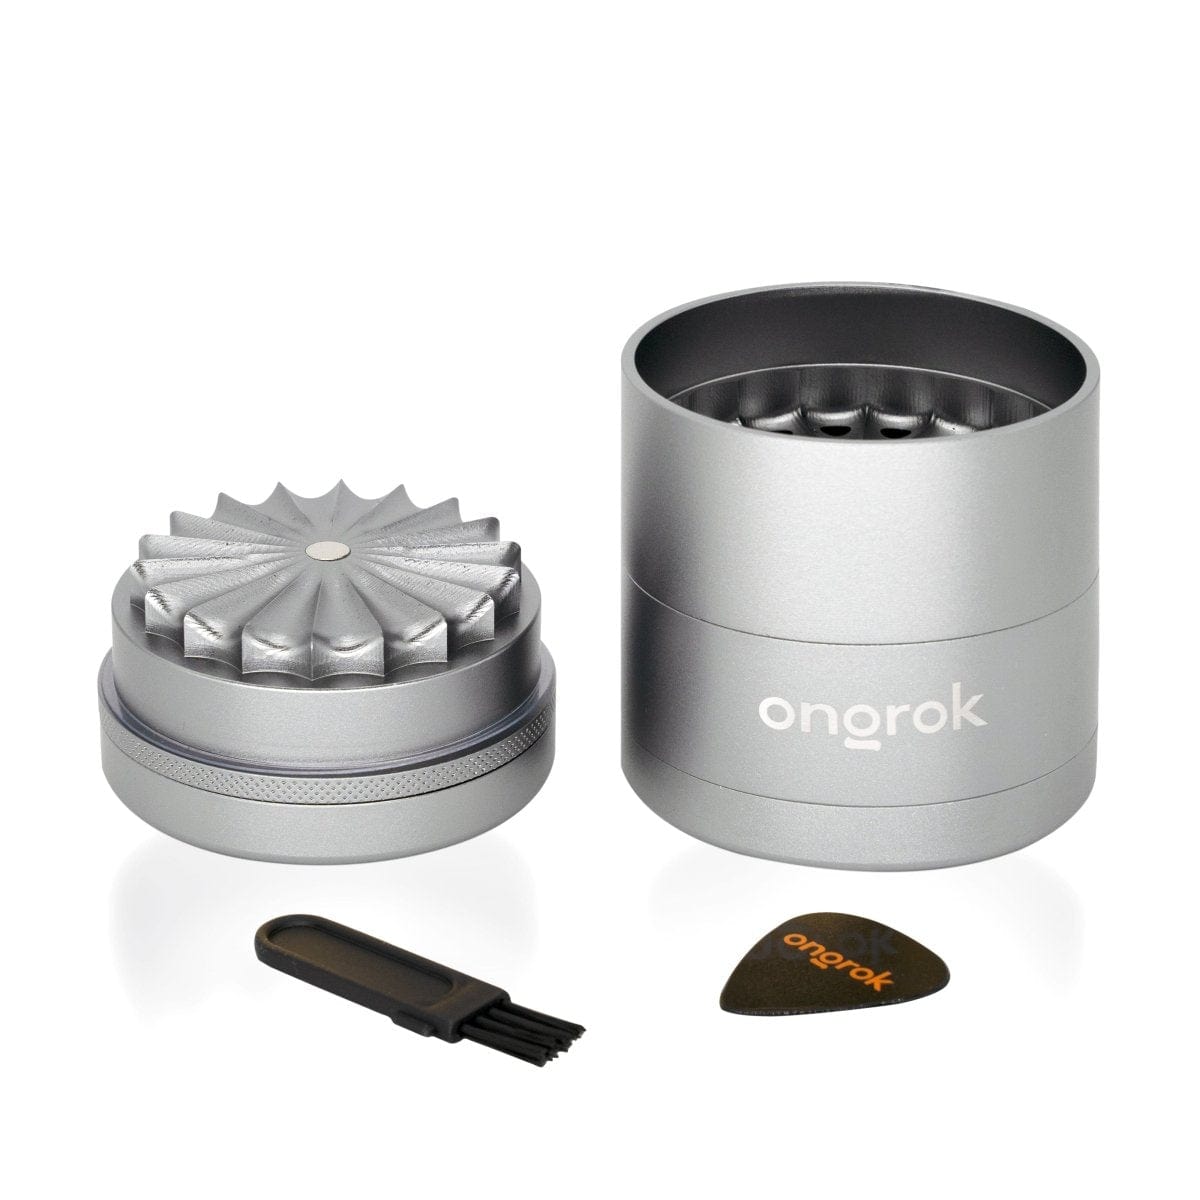 ONGROK USA Silver 5 Piece, Flower Petal Toothless Grinder with Storage